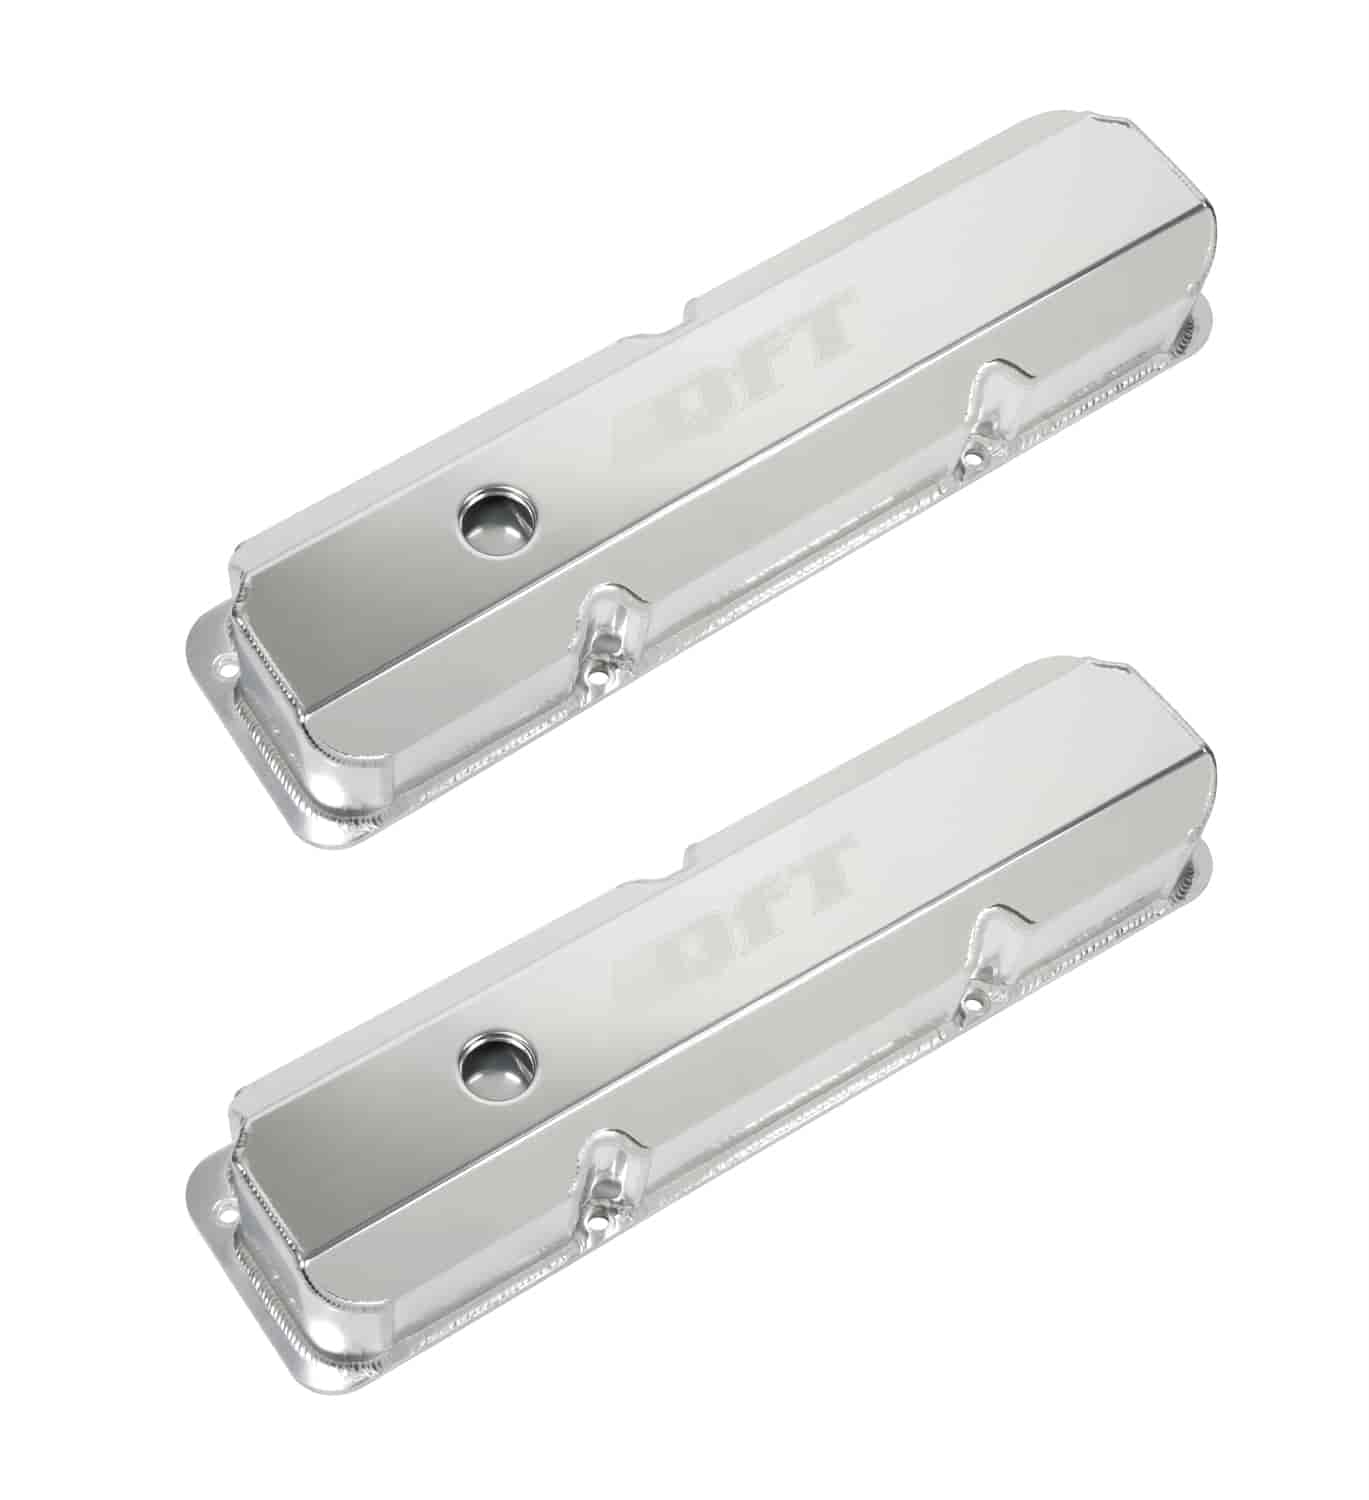 Fabricated Aluminum Tall Valve Covers 1958-1976 Ford 332-428 FE Silver